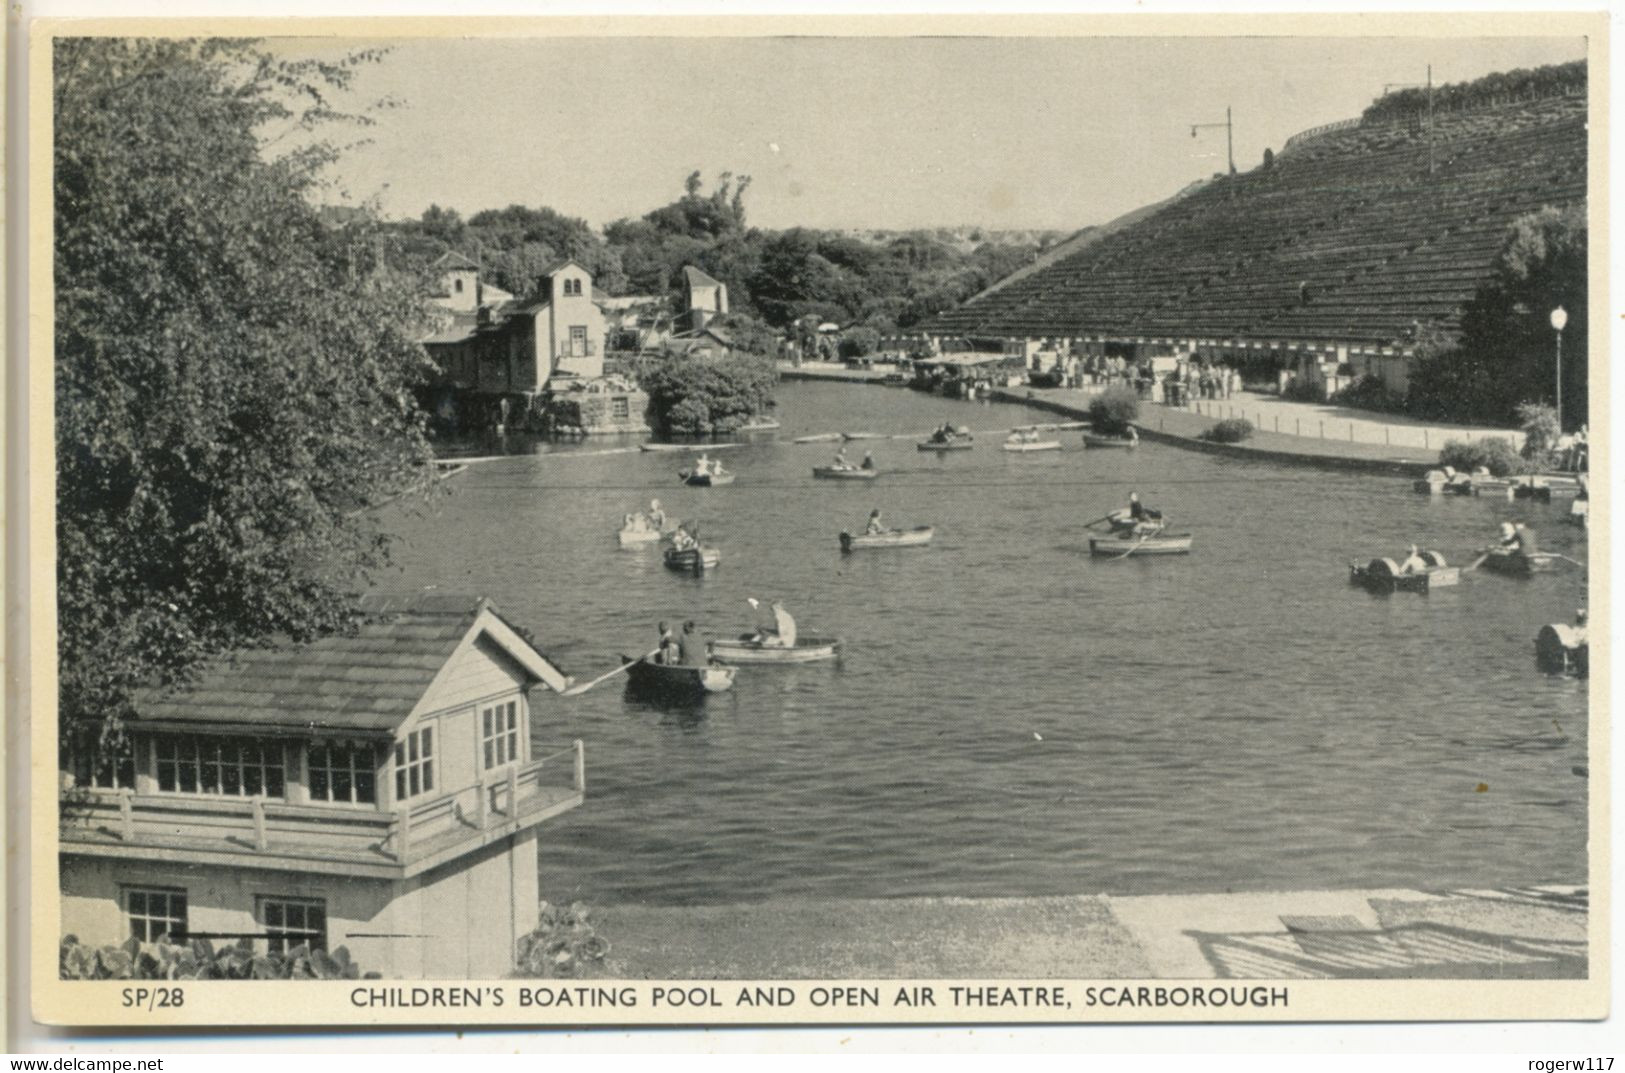 Children's Boating Pool And Open Air Theatre, Scarborough - Scarborough